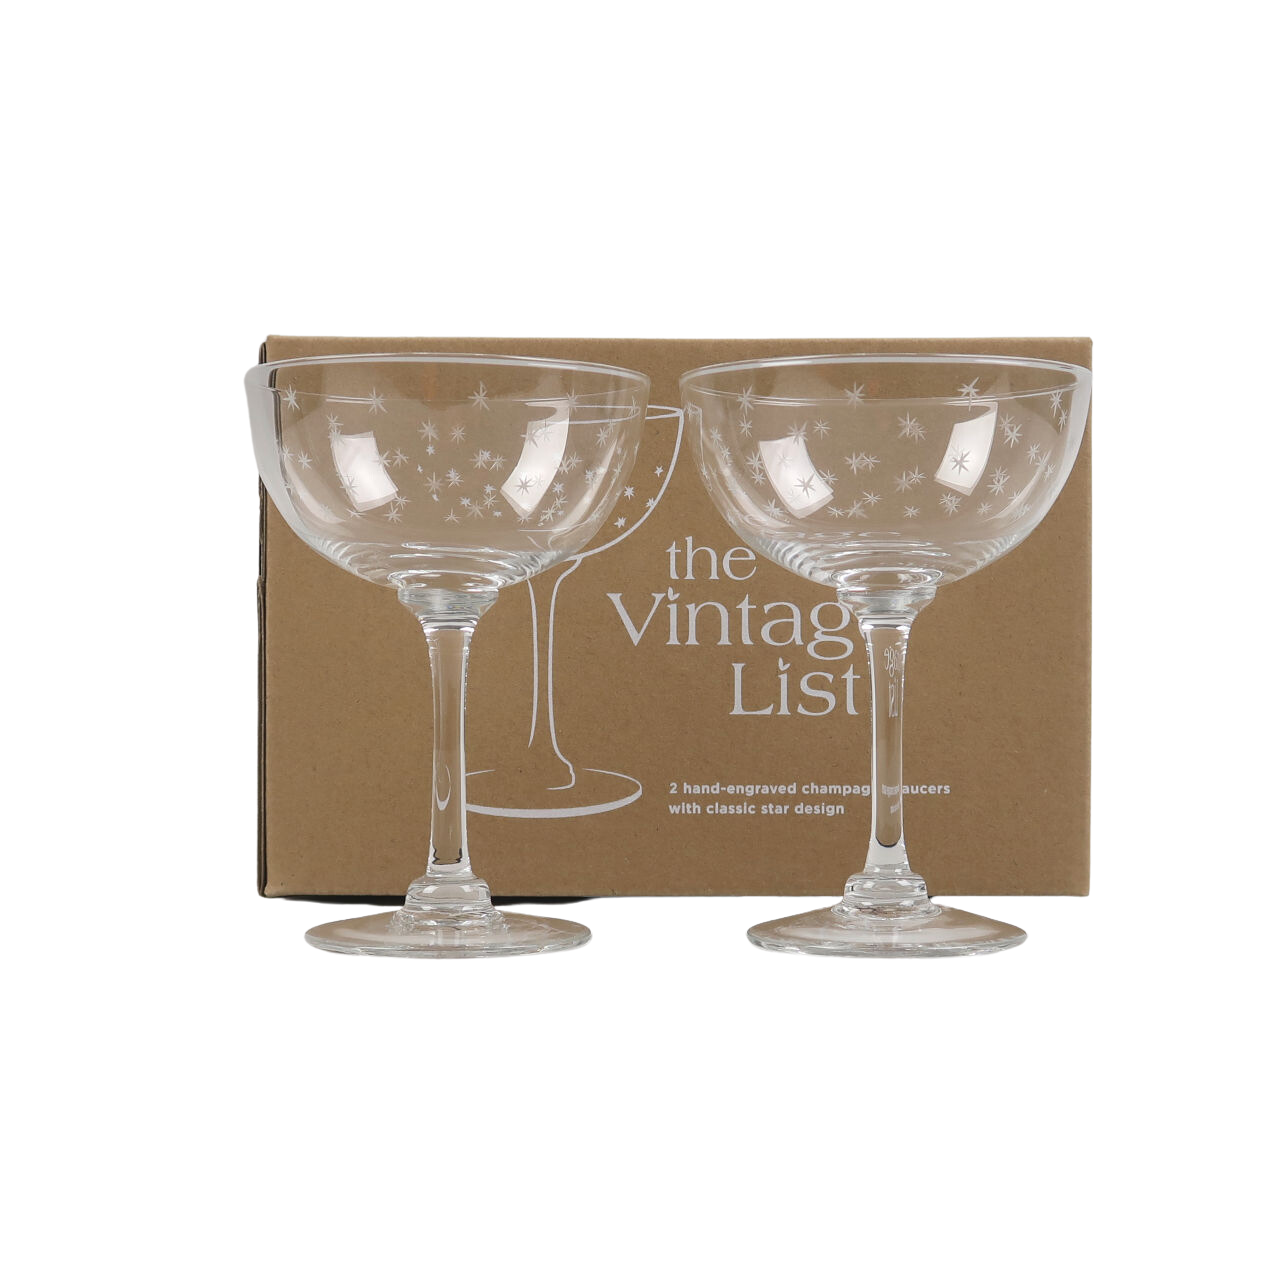 The Vintage List Box of 2 Etched 'Star' Design Champagne Coupes